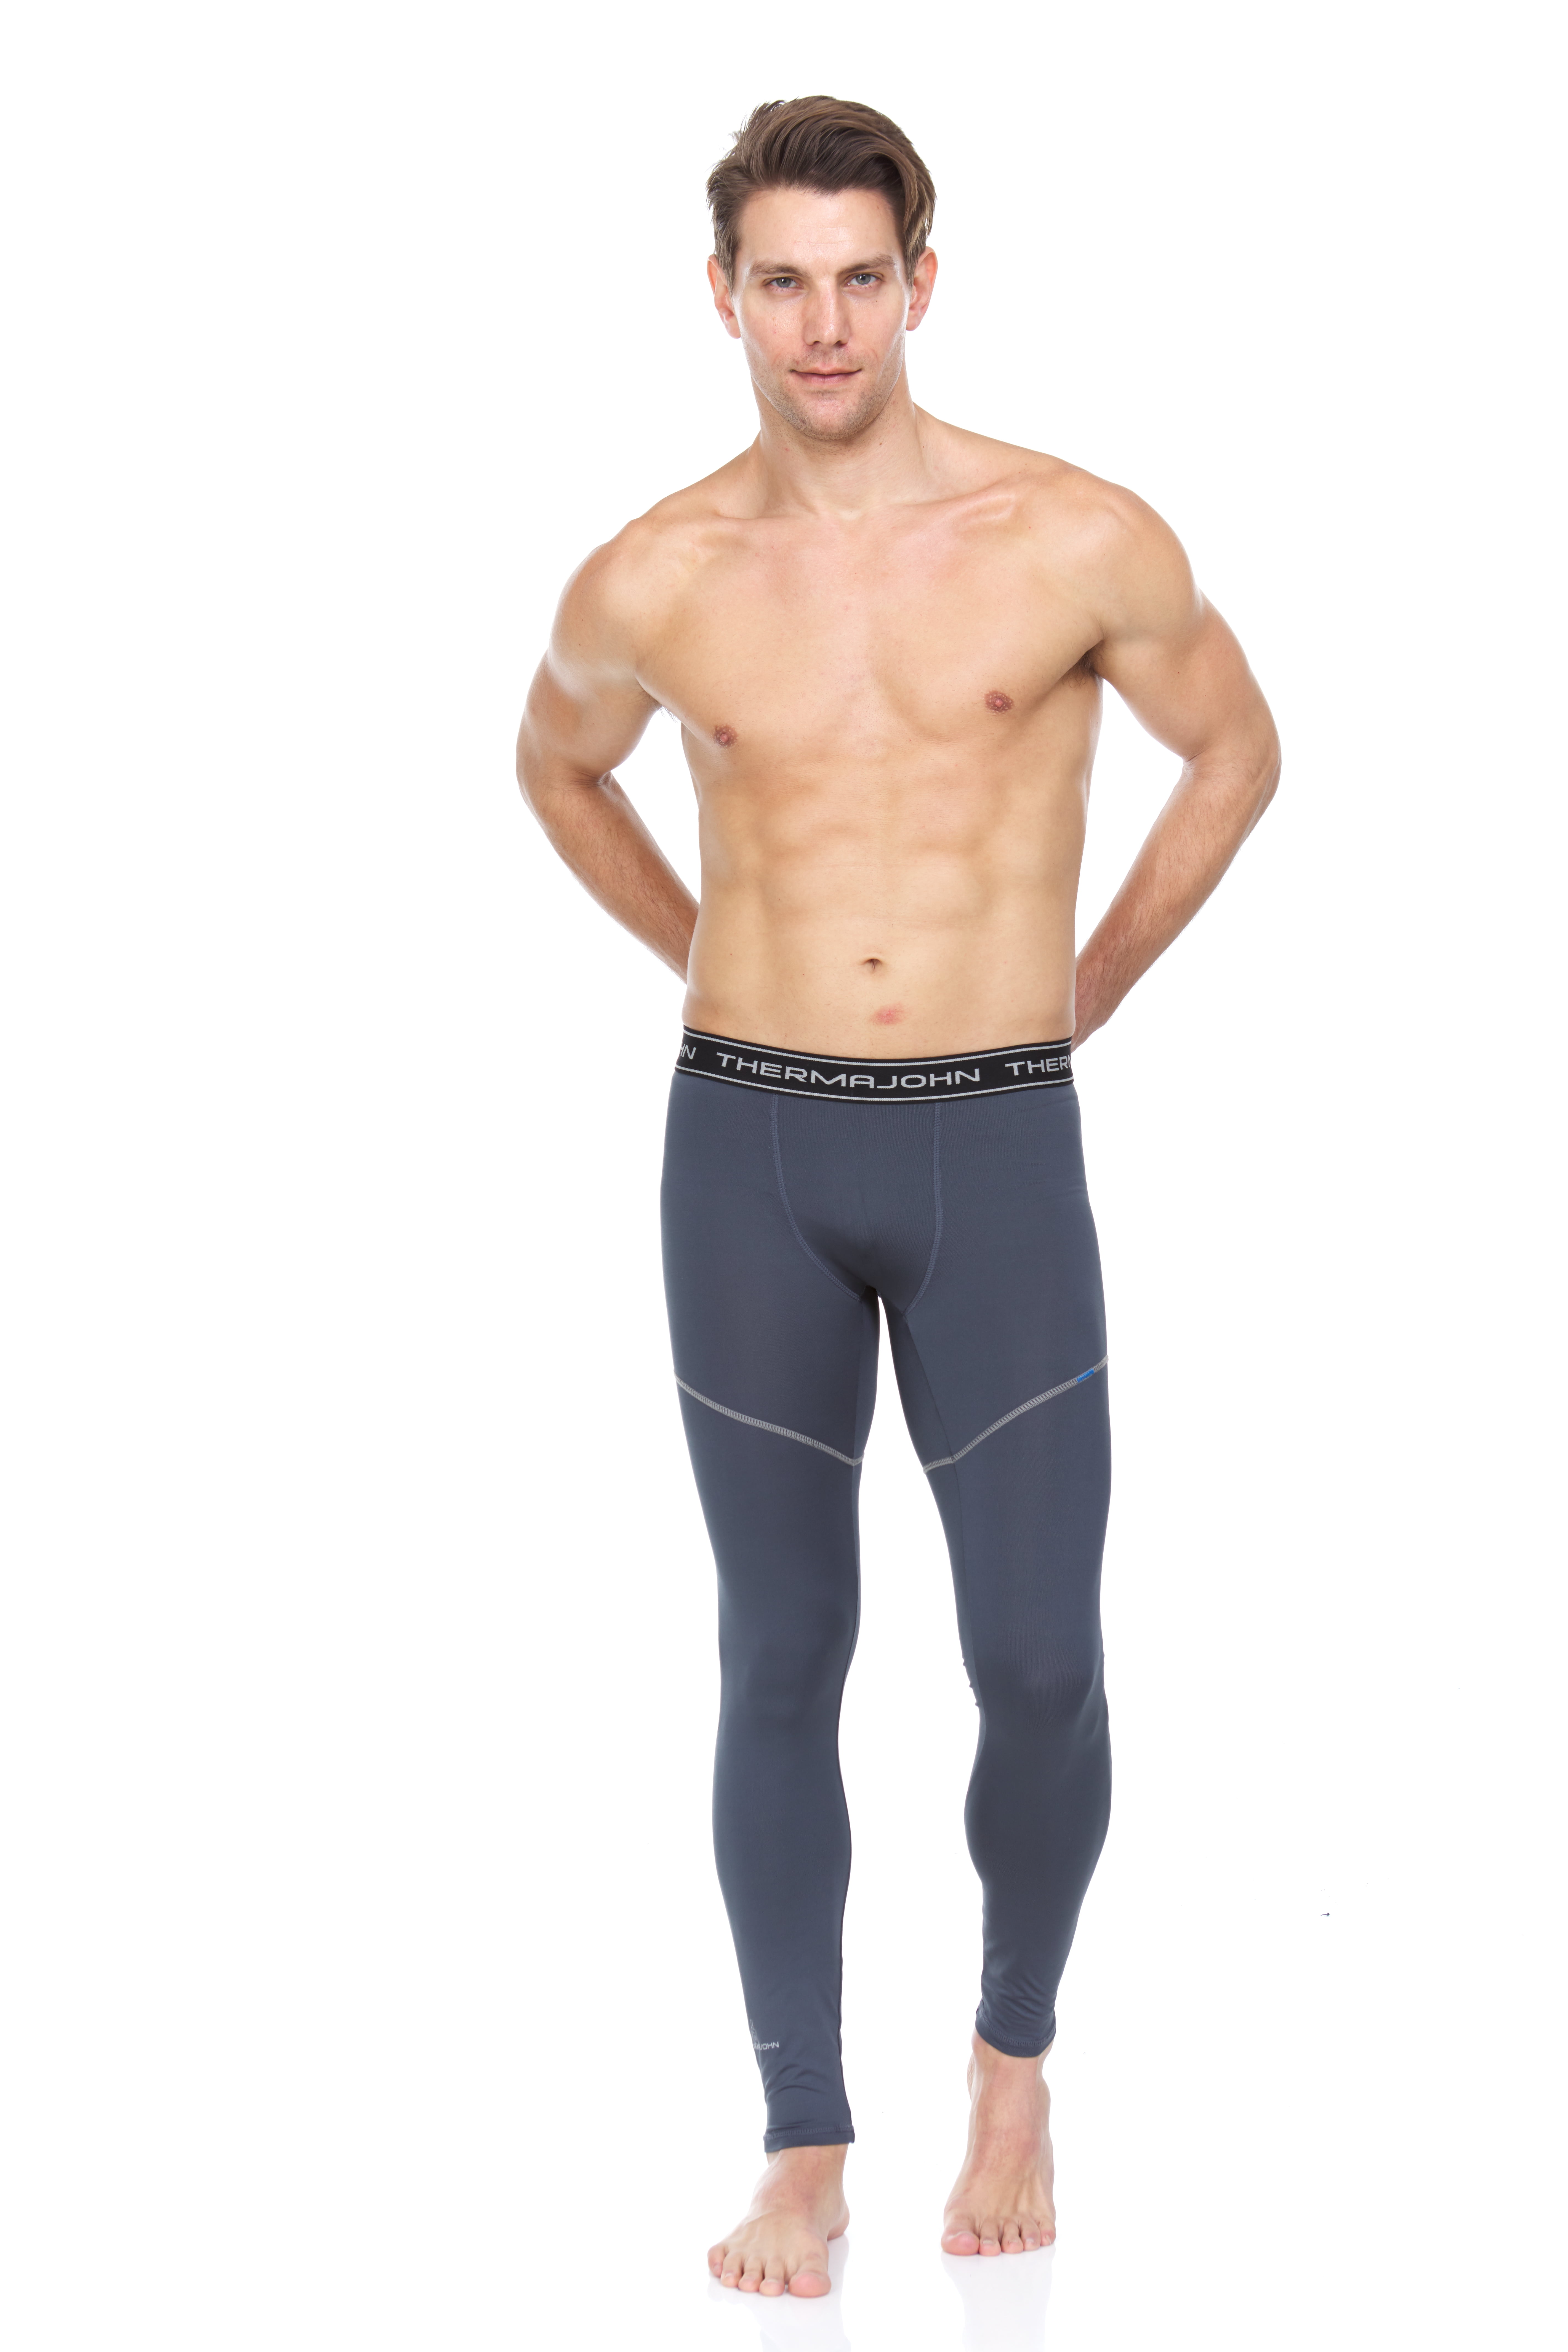 Workout Tights and Compression Leggings for Men Thermajohn Compression Pants Mens 